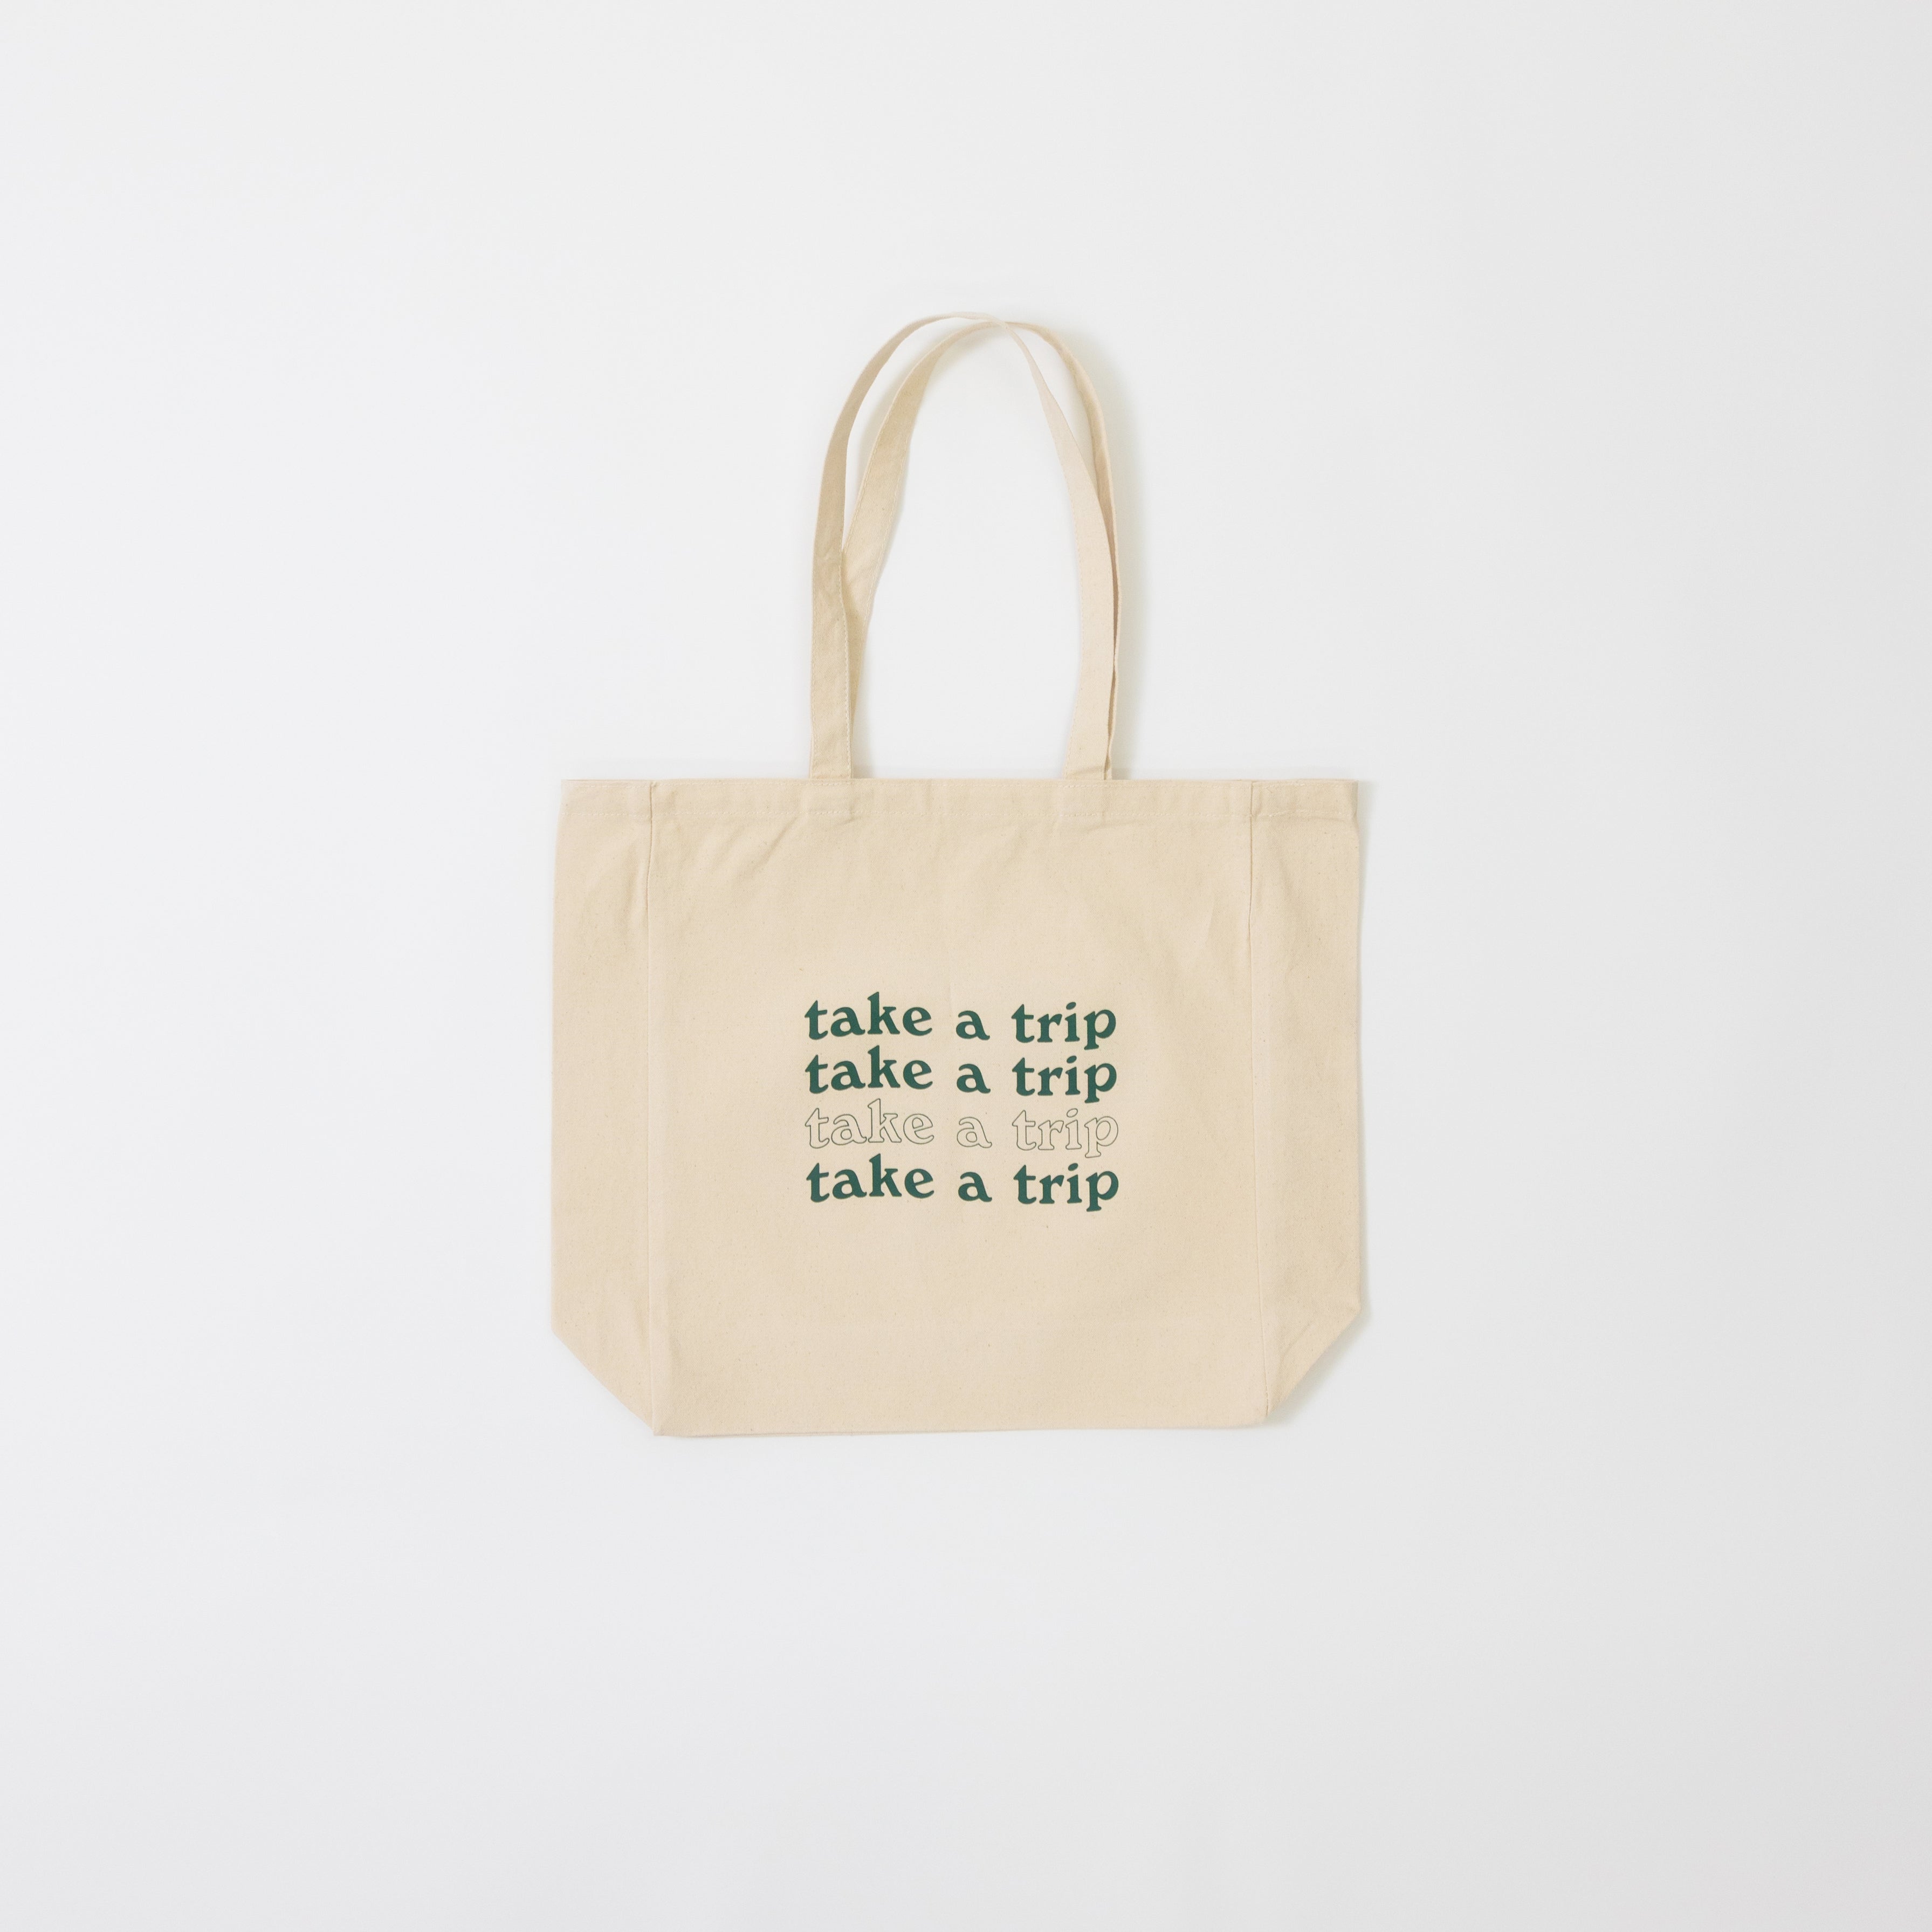 product-featured no-display good energy gang tote bag new